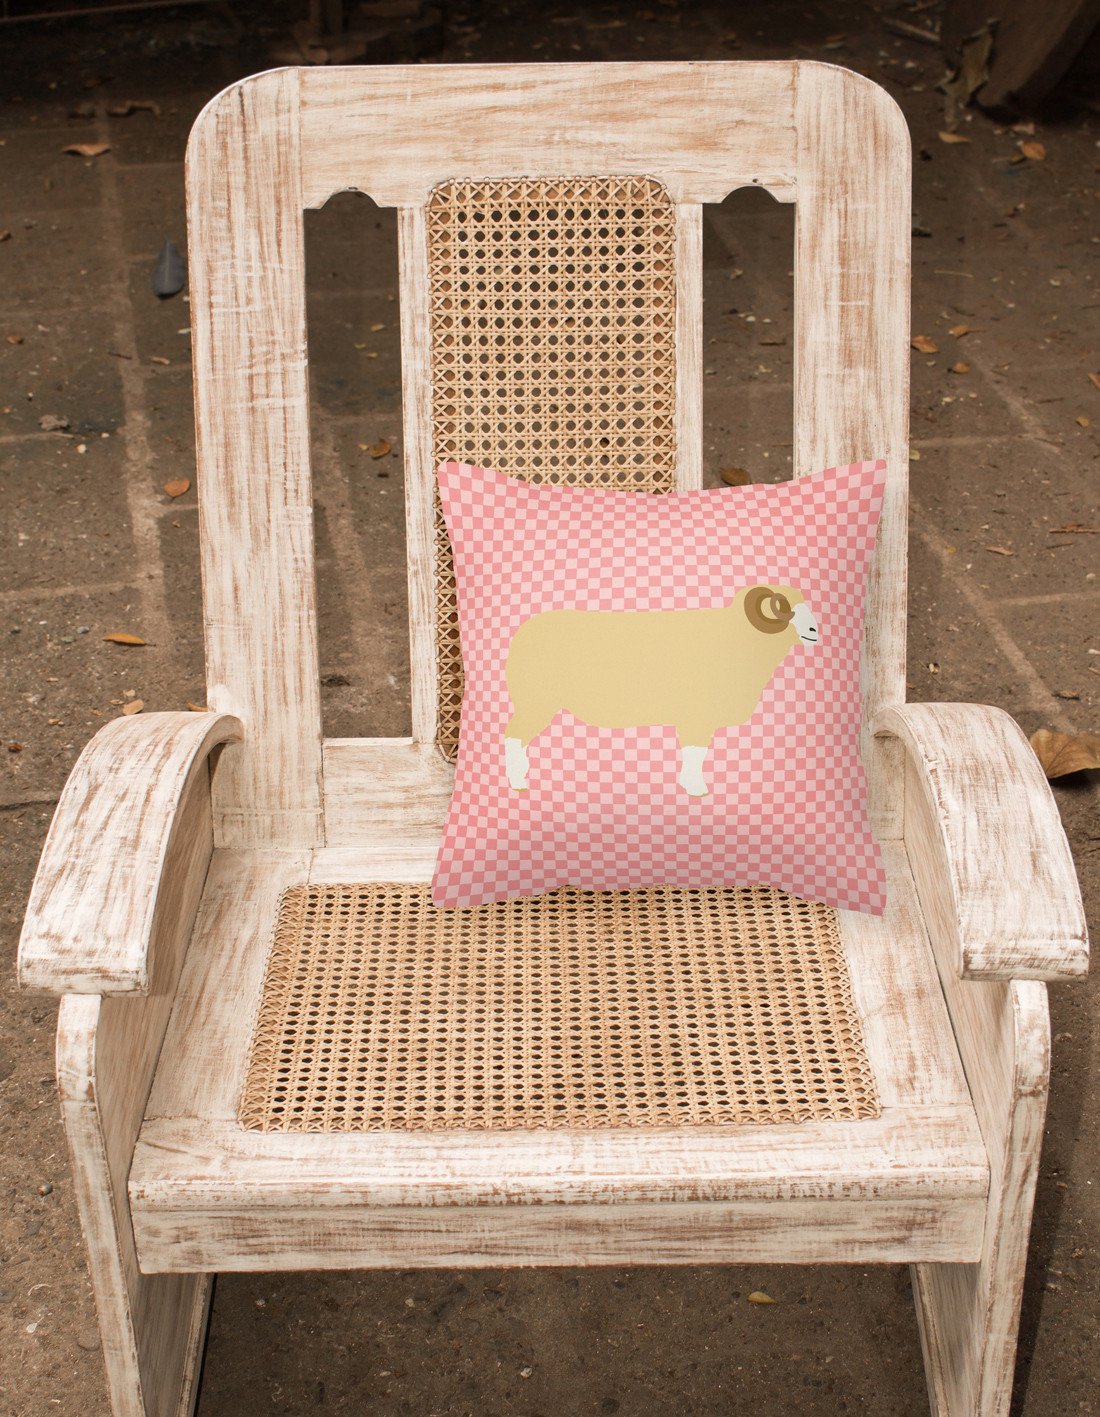 Horned Dorset Sheep Pink Check Fabric Decorative Pillow BB7980PW1818 by Caroline's Treasures